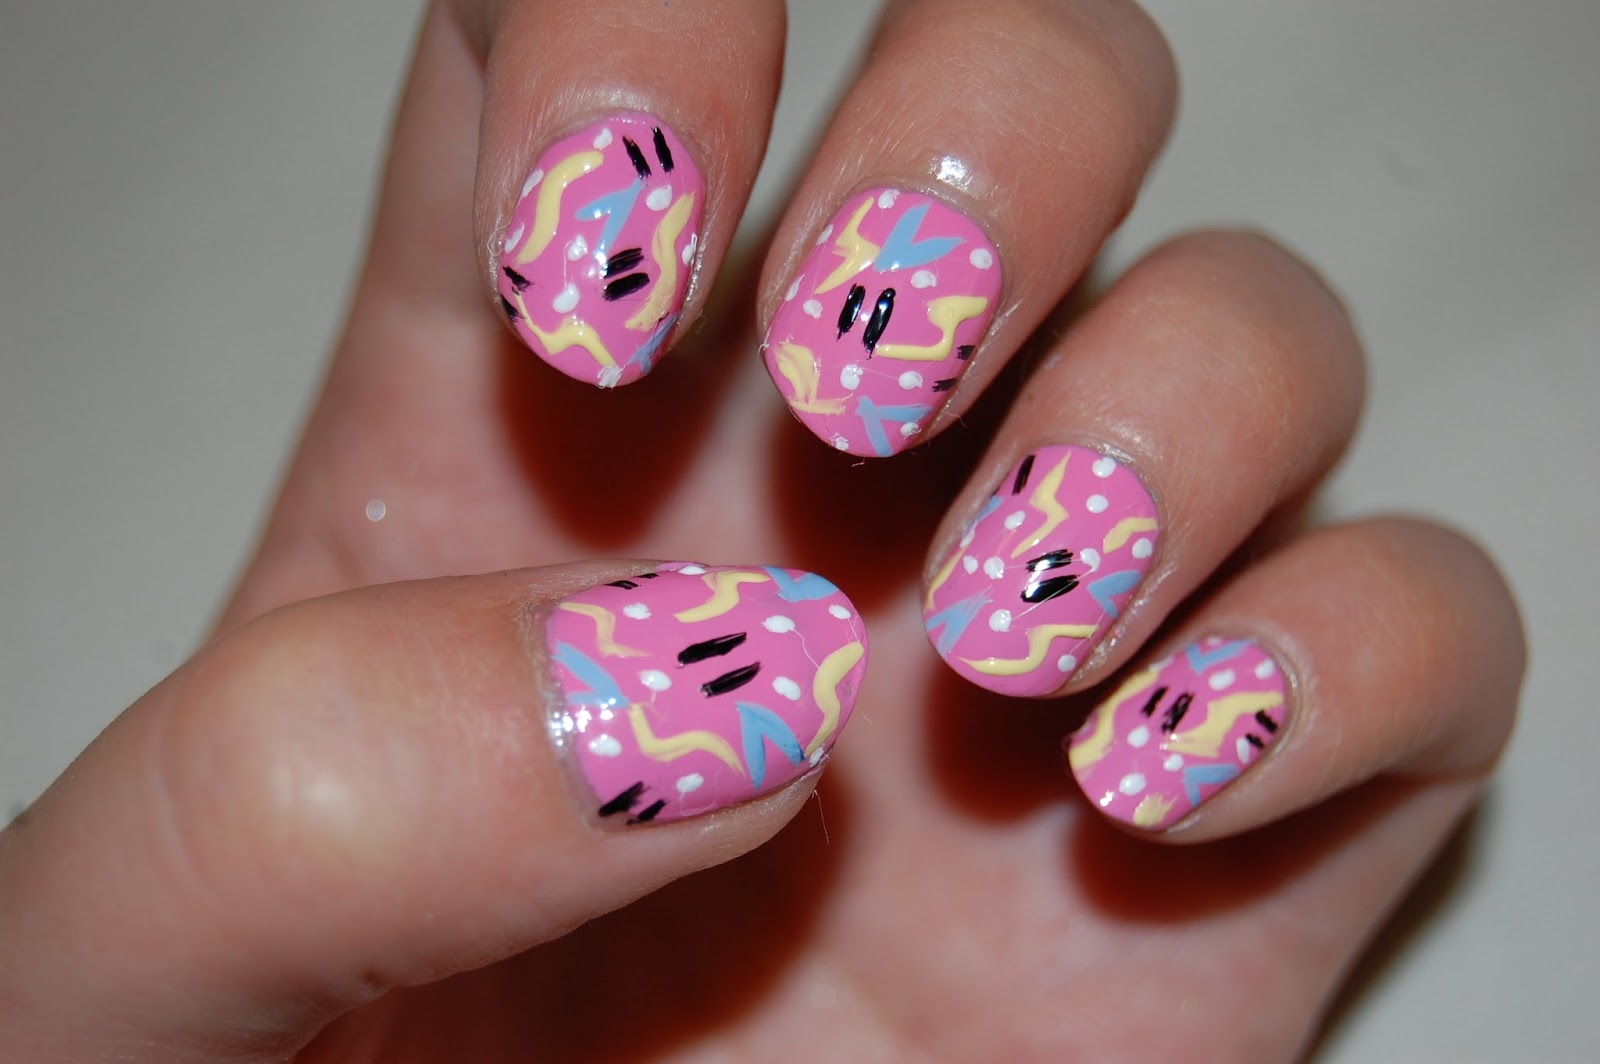 8. Graffiti-inspired nail art from the 90s - wide 6